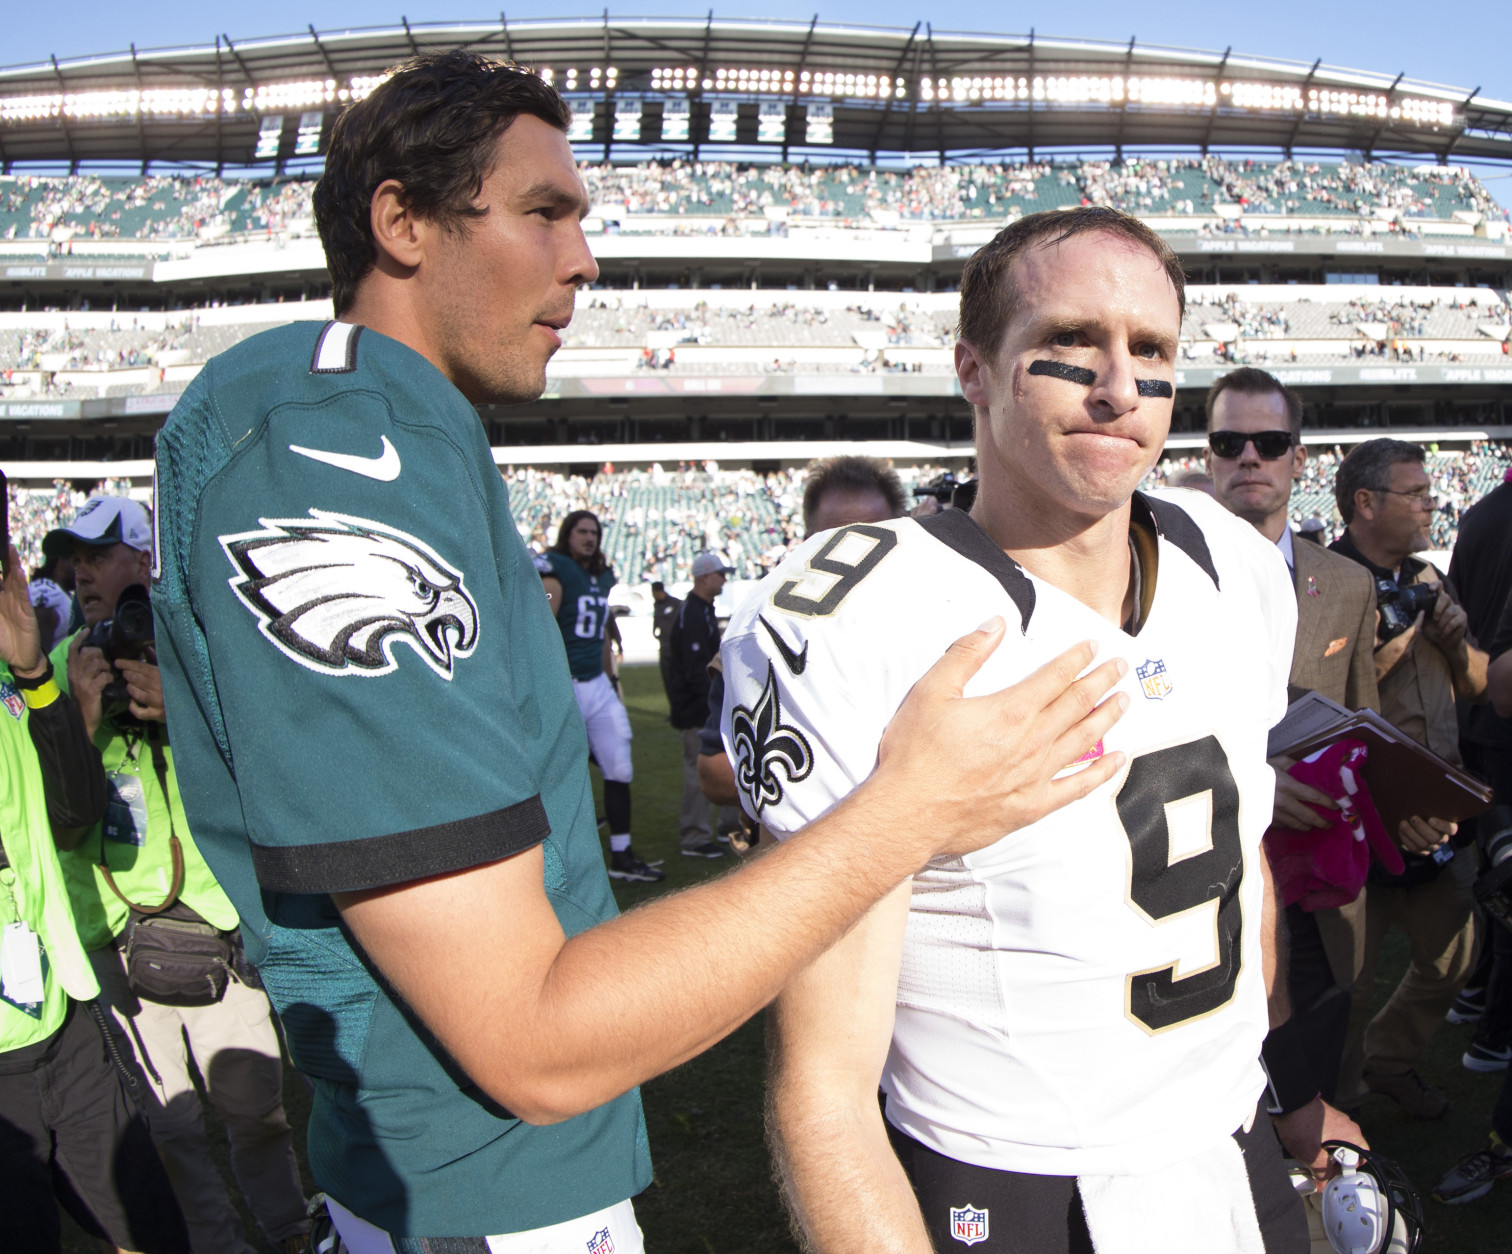 PHILADELPHIA, PA - OCTOBER 11: Sam Bradford #7 of the Philadelphia Eagles greets Drew Brees #9 of the New Orleans Saints after the game on October 11, 2015 at Lincoln Financial field in Philadelphia, Pennsylvania. The Eagles defeated the Saints 39-17. (Photo by Mitchell Leff/Getty Images)